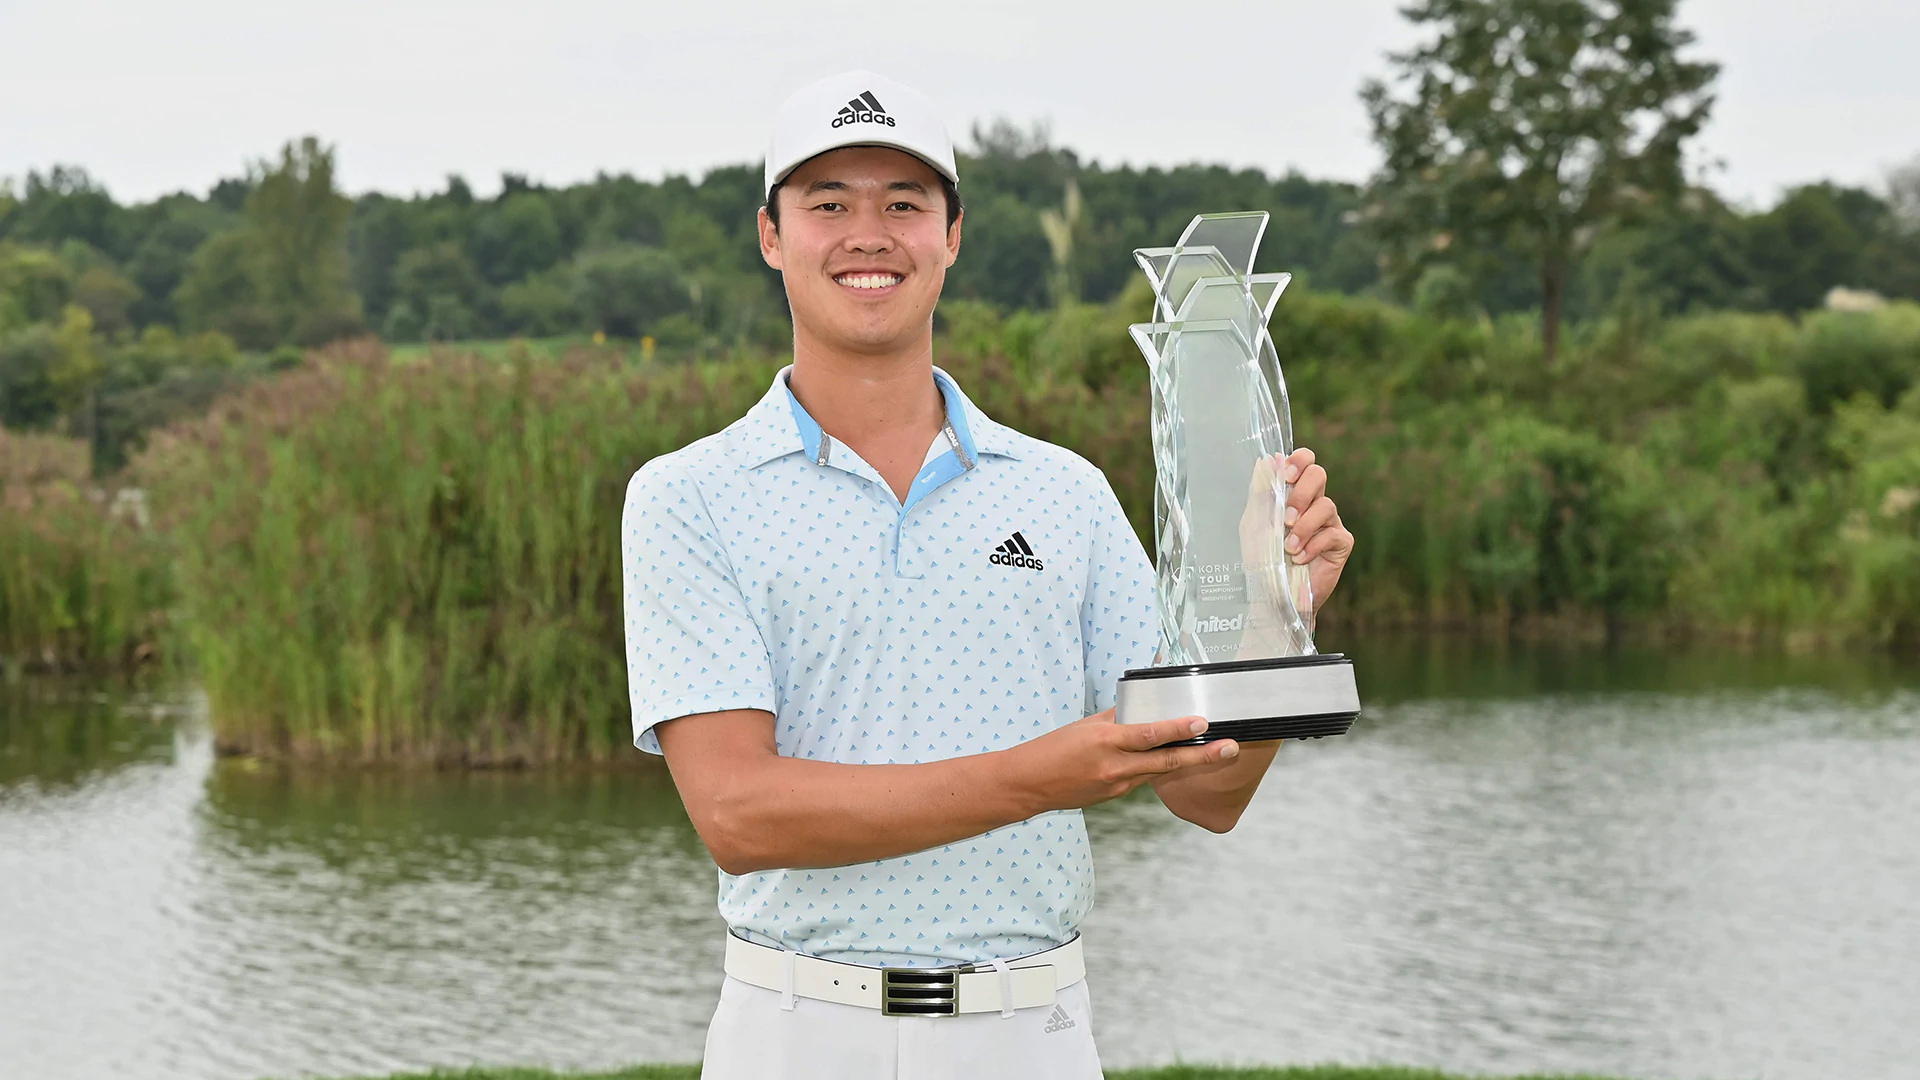 From Monday qualifiers to U.S. Open berth, Brandon Wu wins KFT Championship